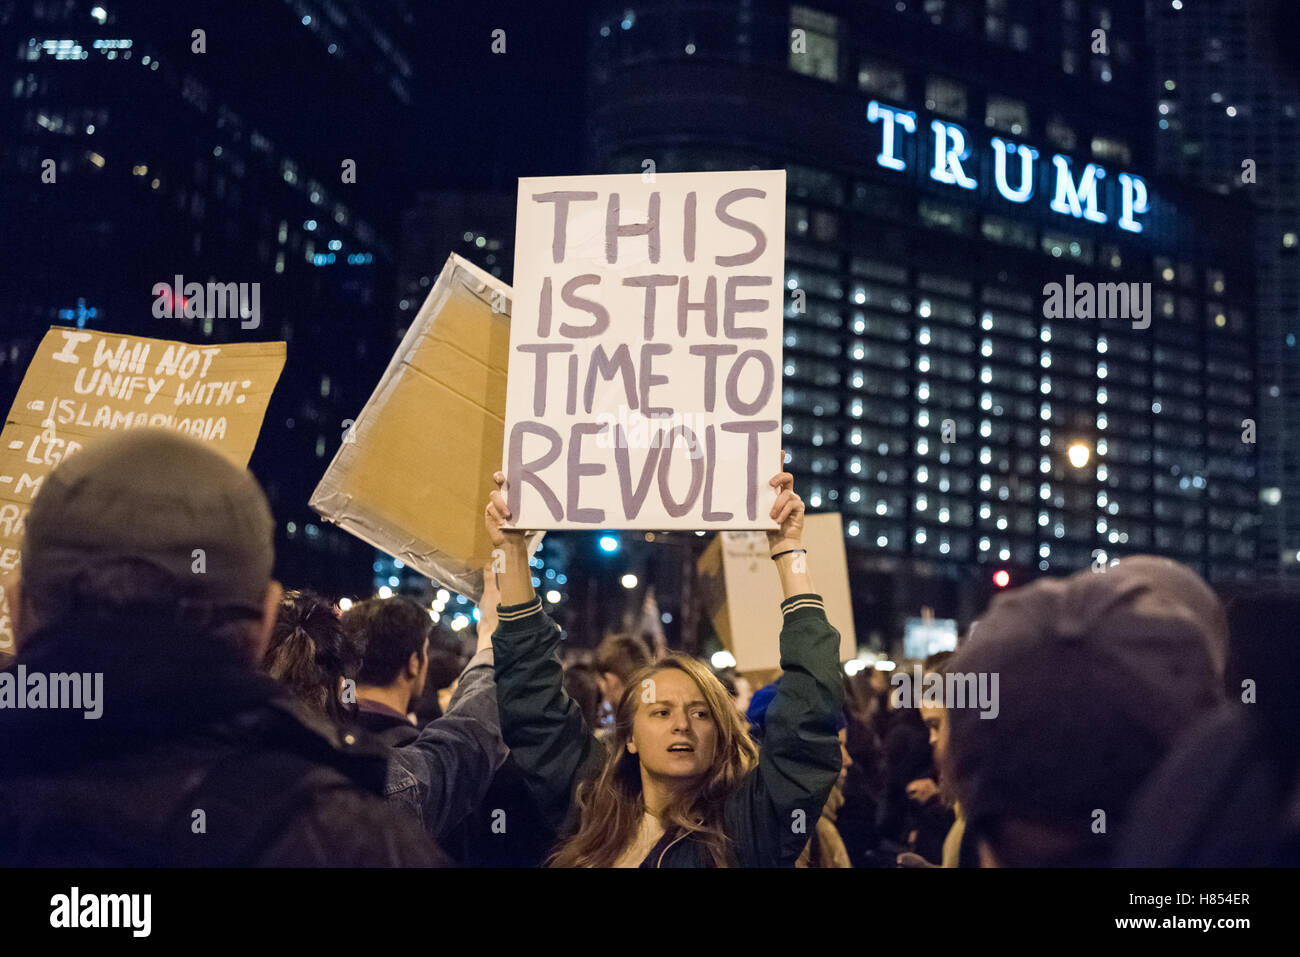 Chicago, Illinois, USA. 9th November, 2016. A protestor holds a sign reading 'This is the time to revolt' in front of Trump tower in a anti-trump protest. Credit:  Caleb Hughes/Alamy Live News. Stock Photo